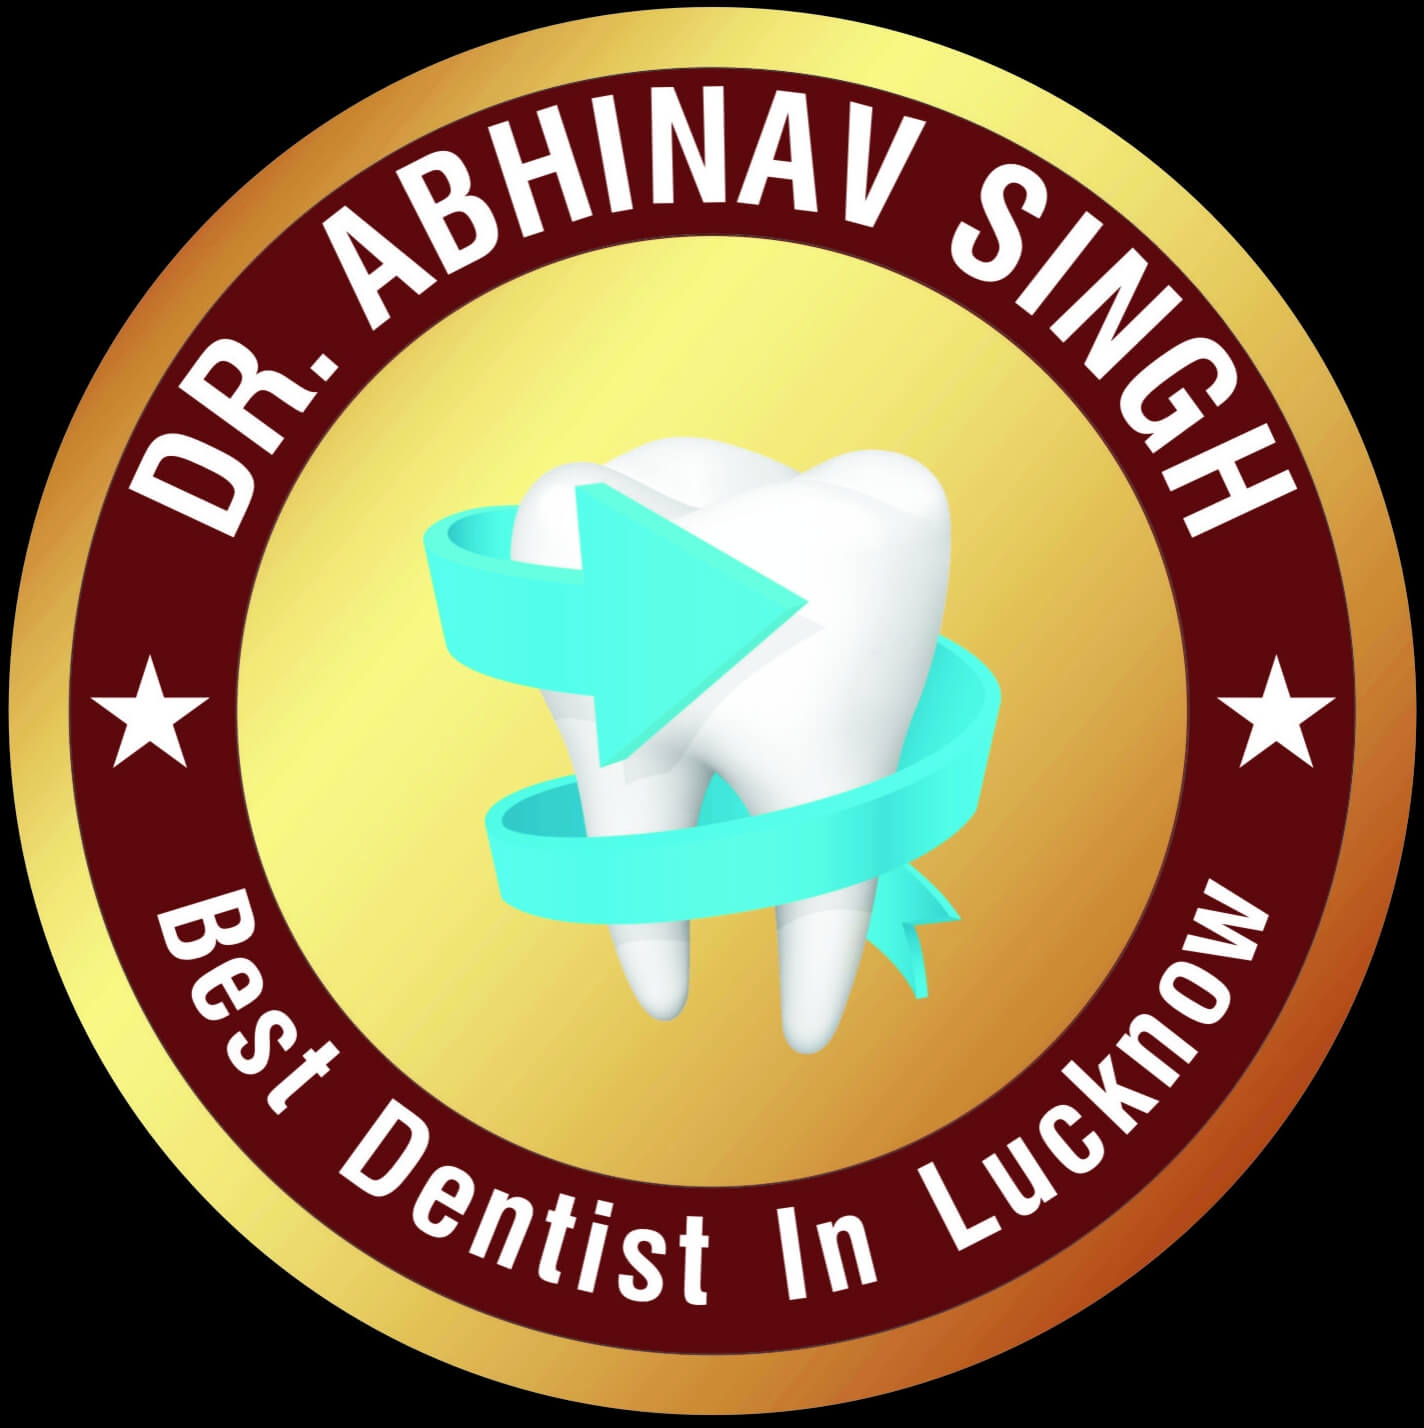 Dr.Abhinav Singh- Best Dentist in Lucknow|Clinics|Medical Services